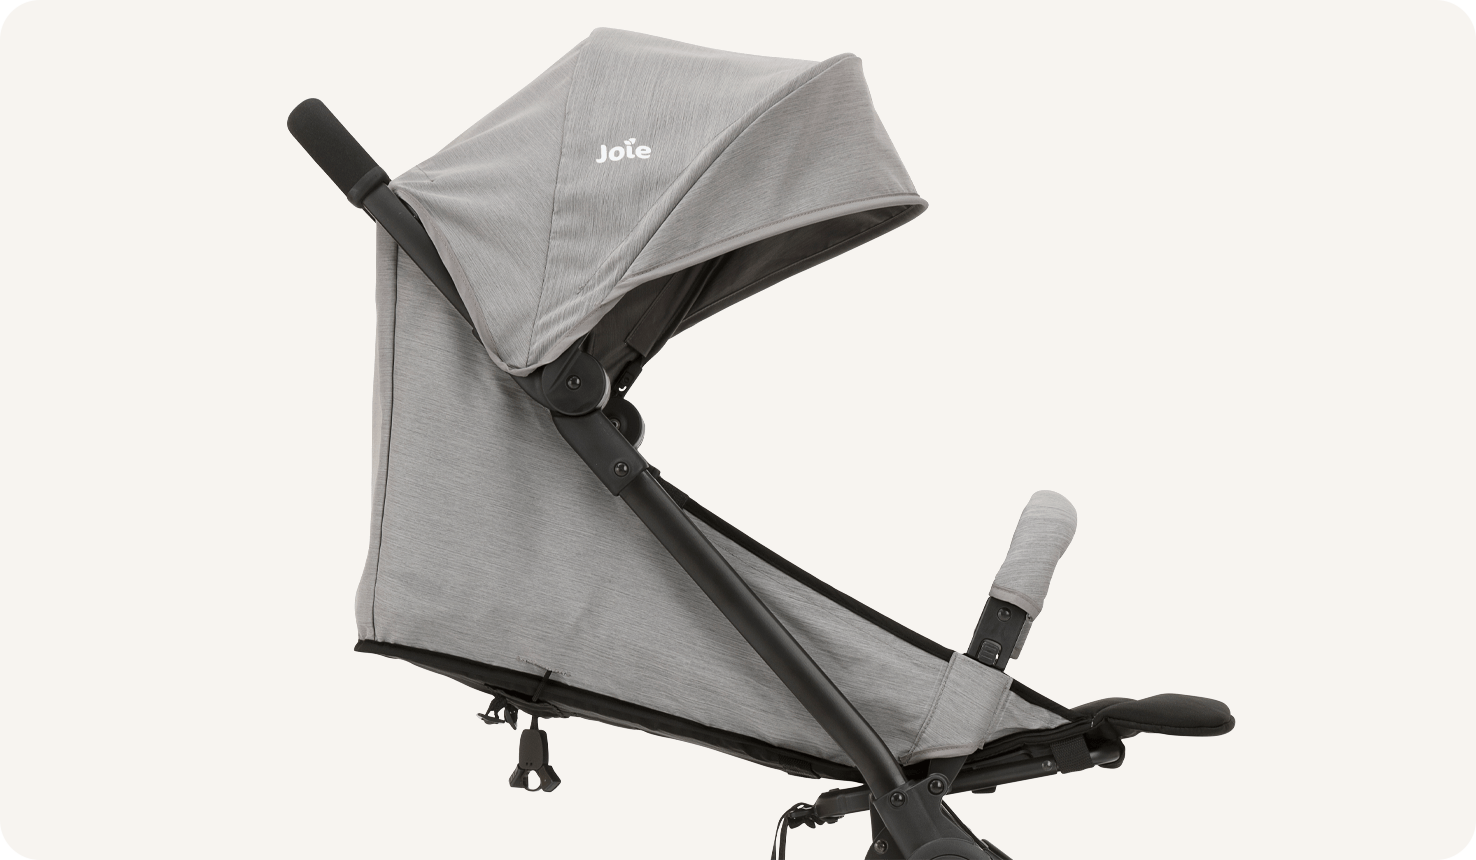  Joie Pact Lite in black and grey with seat back on lowest setting on a side angle. 